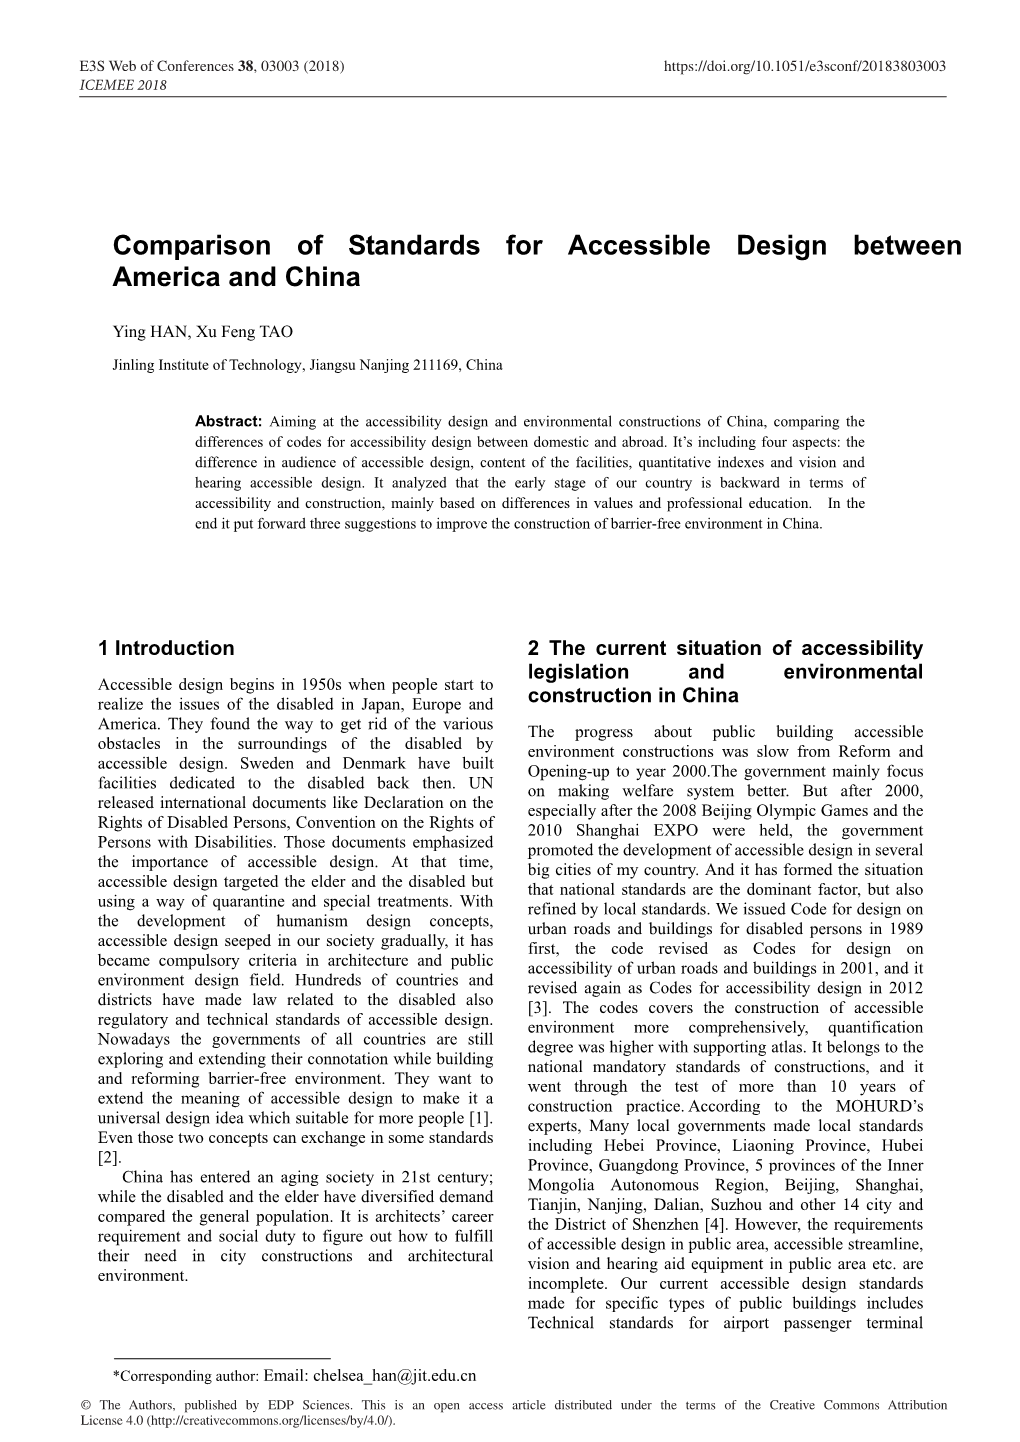 Comparison of Standards for Accessible Design Between America and China